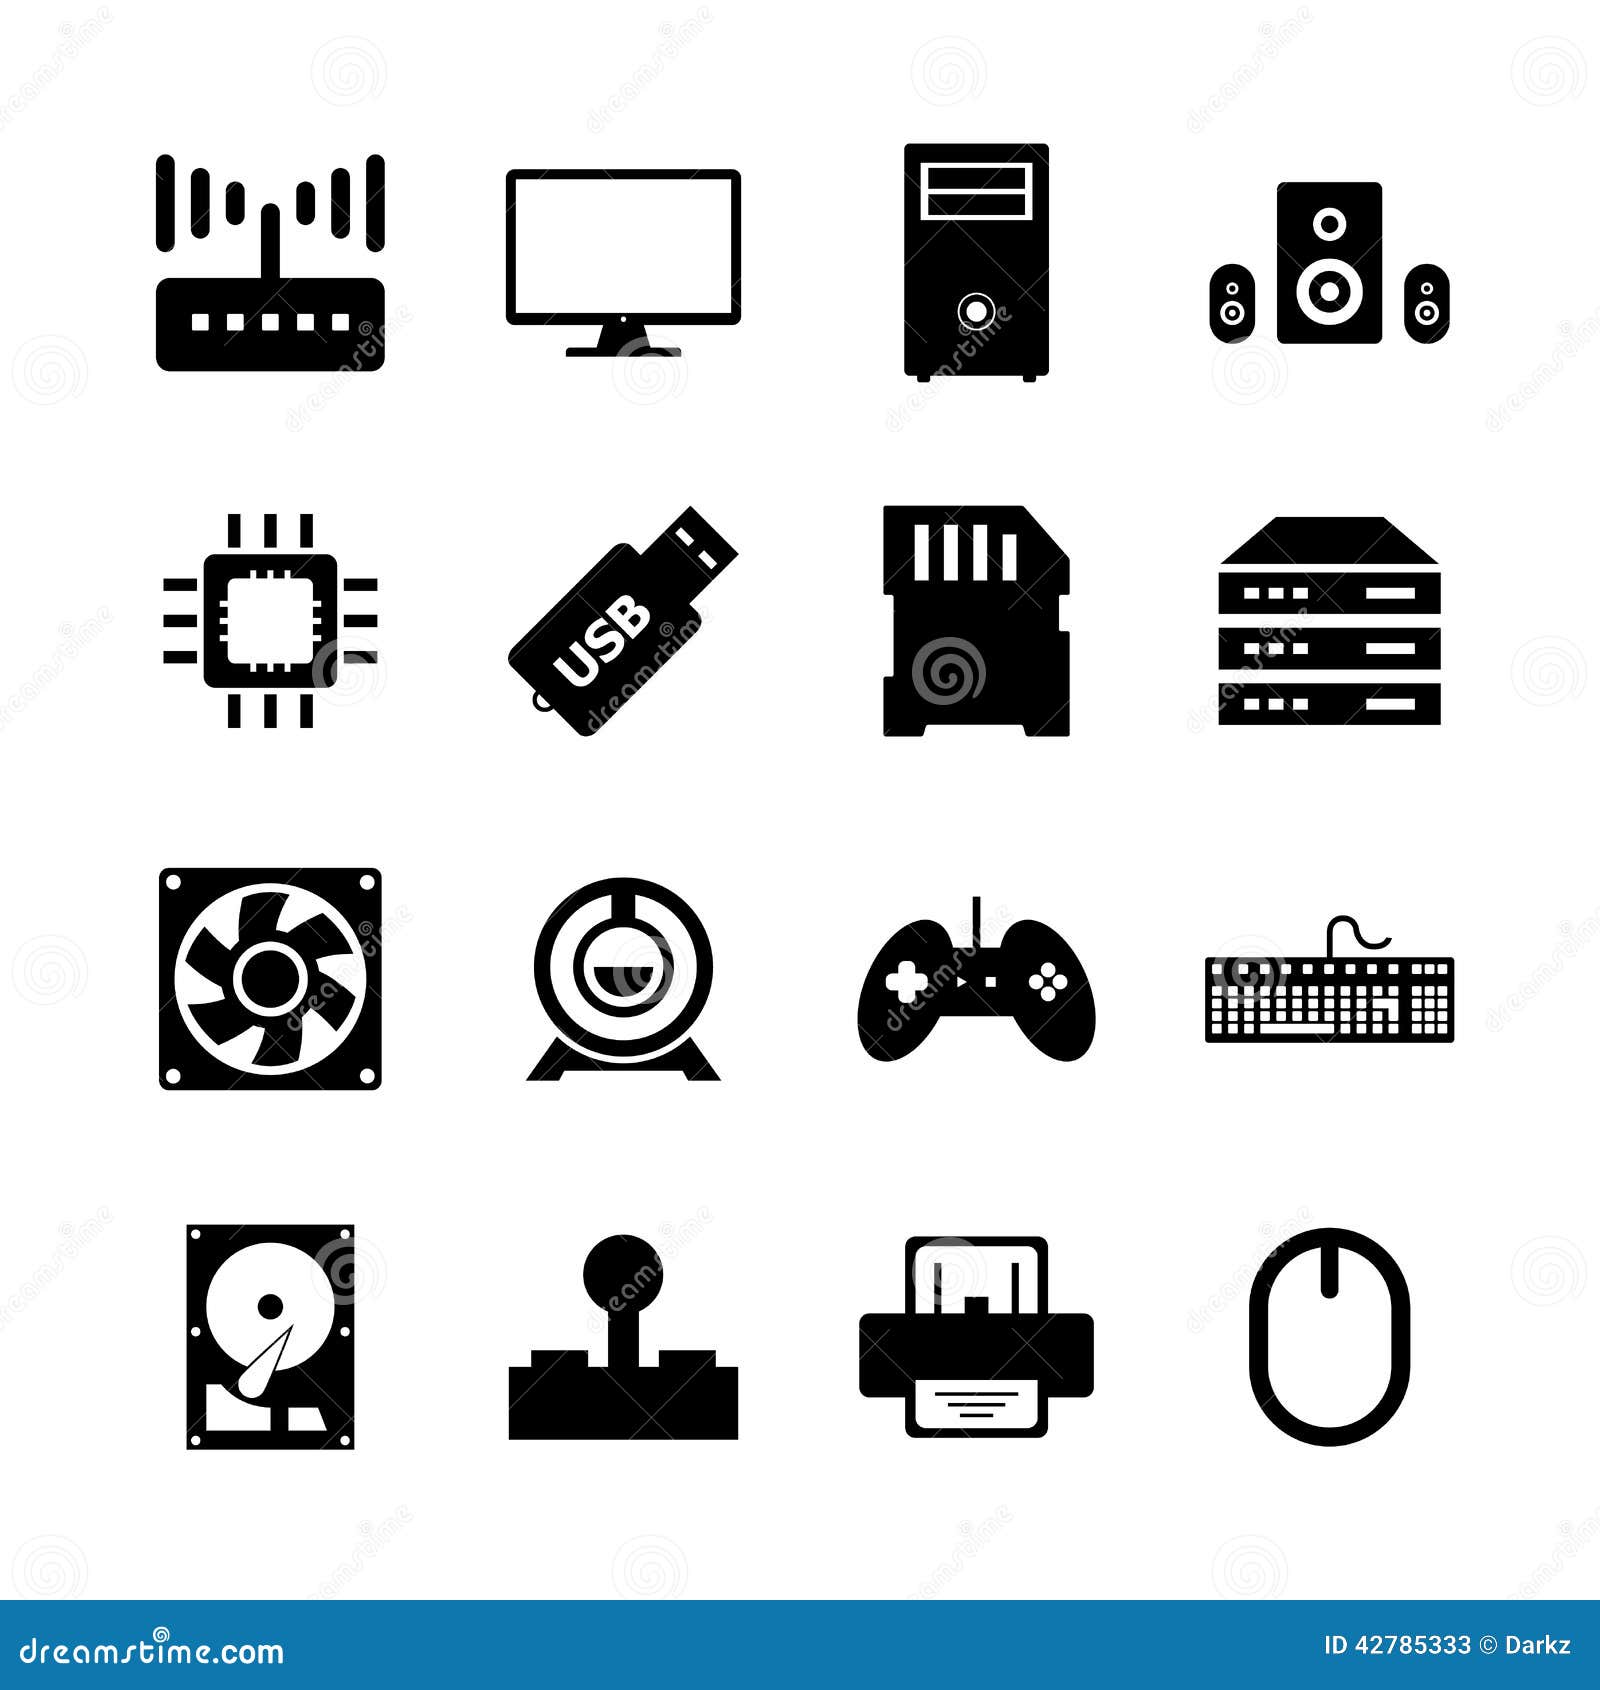 computer hardware clipart free download - photo #46